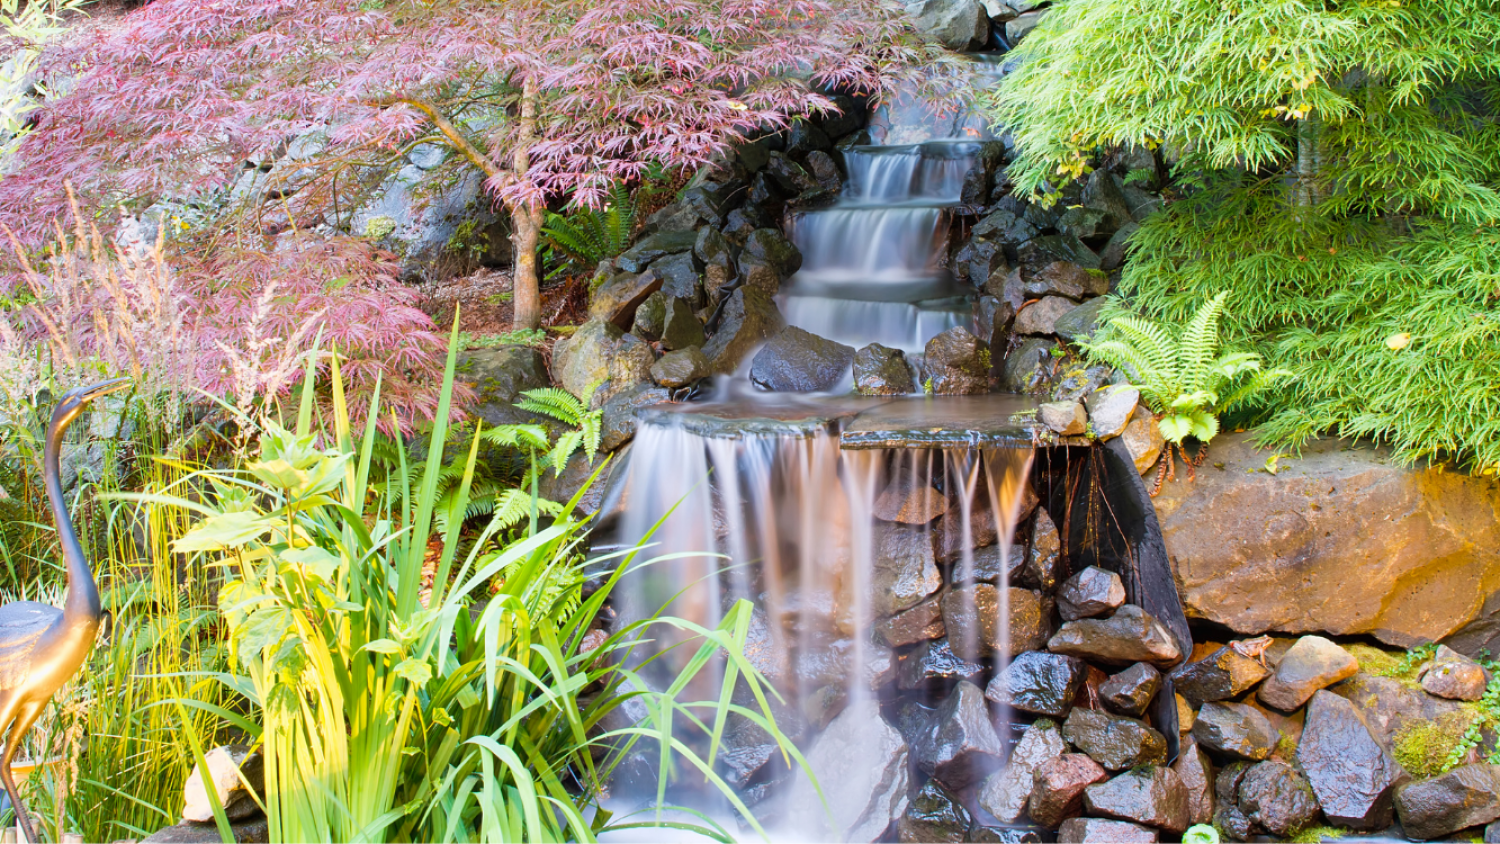 7 Easy Steps To Build DIY Small Waterfall